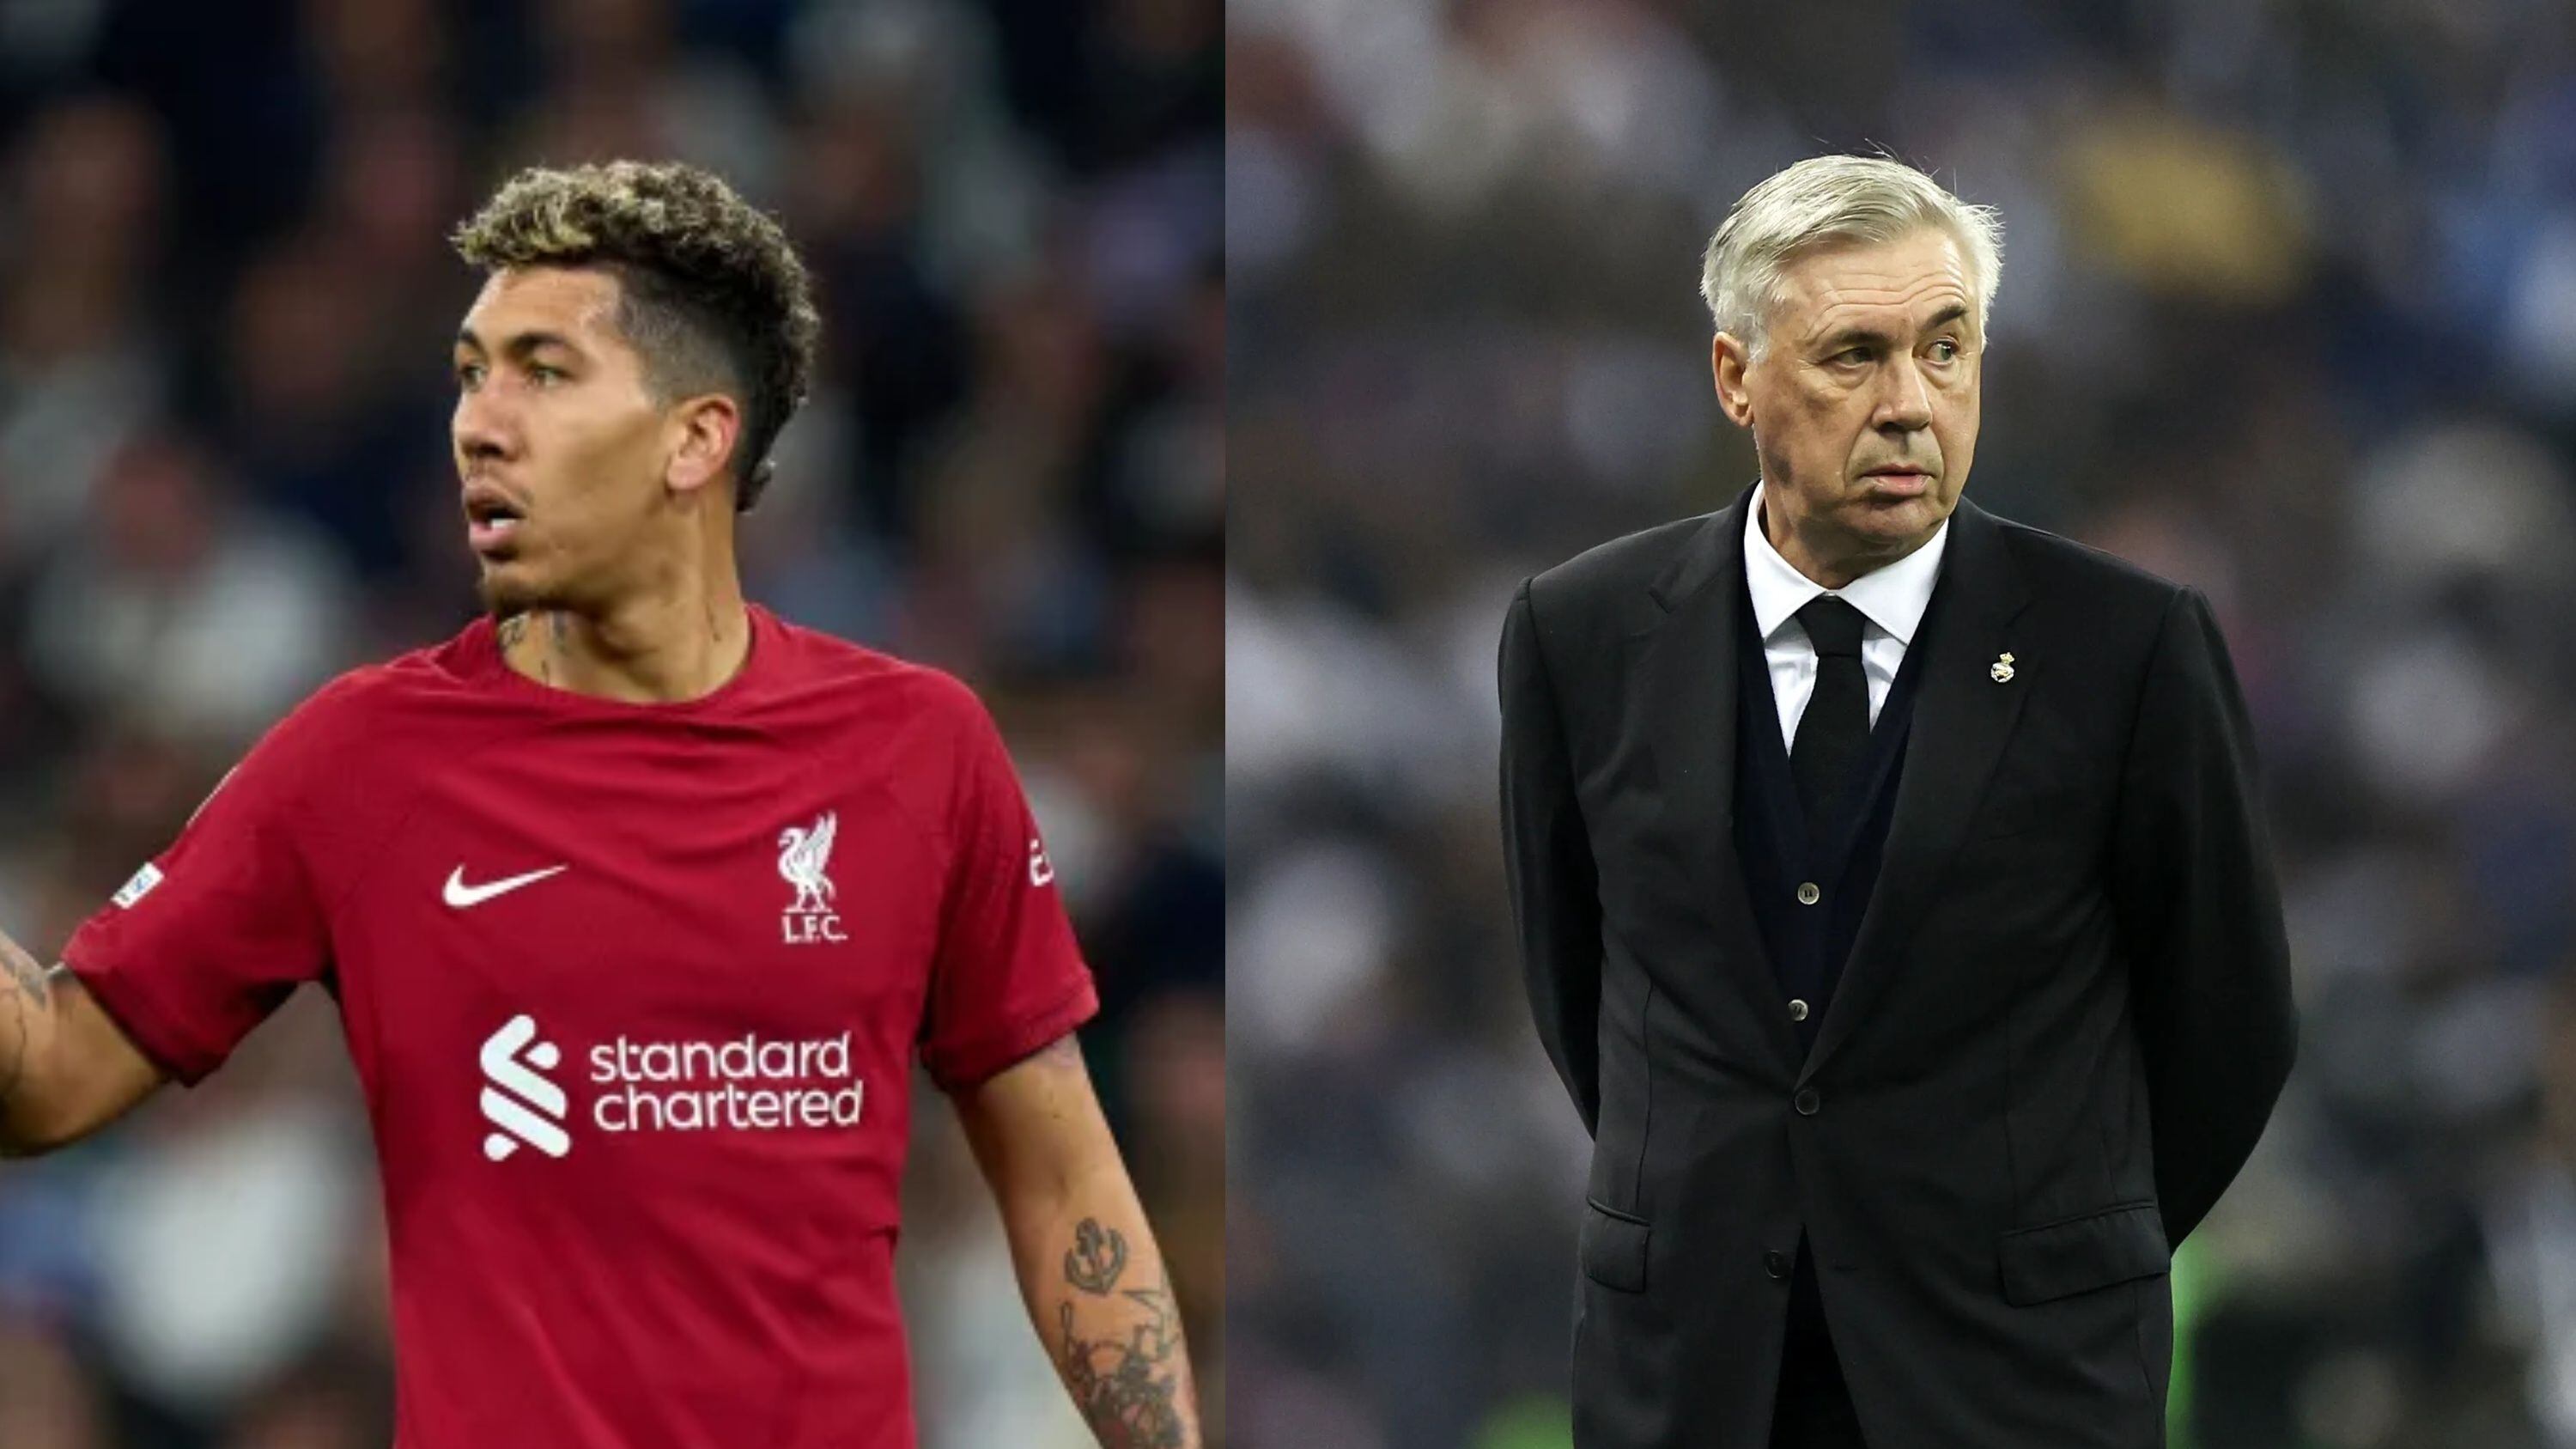 While at Liverpool he earned 10 million euros, what Roberto Firmino would earn at Real Madrid